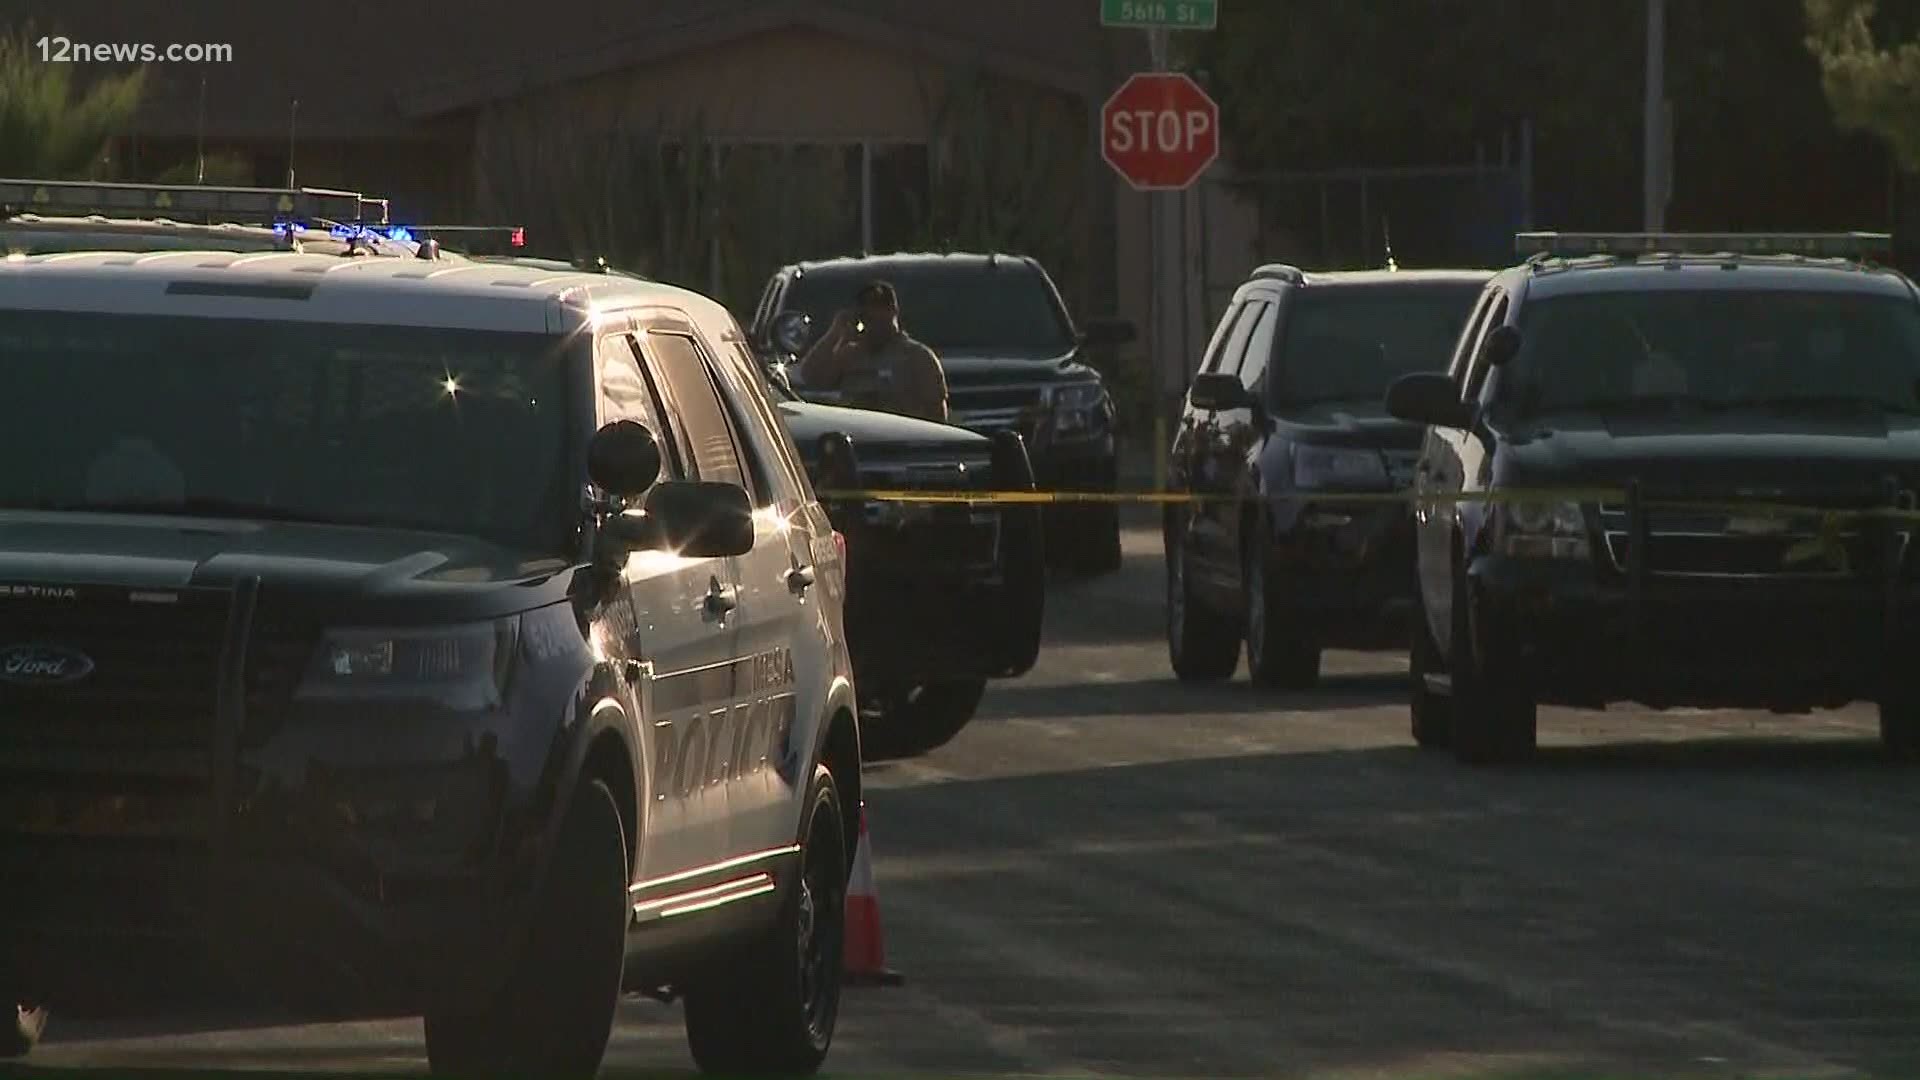 70 year old man dies after mcso deputy involved shooting in mesa 12news com man with life threatening injuries after mcso deputy involved shooting in mesa